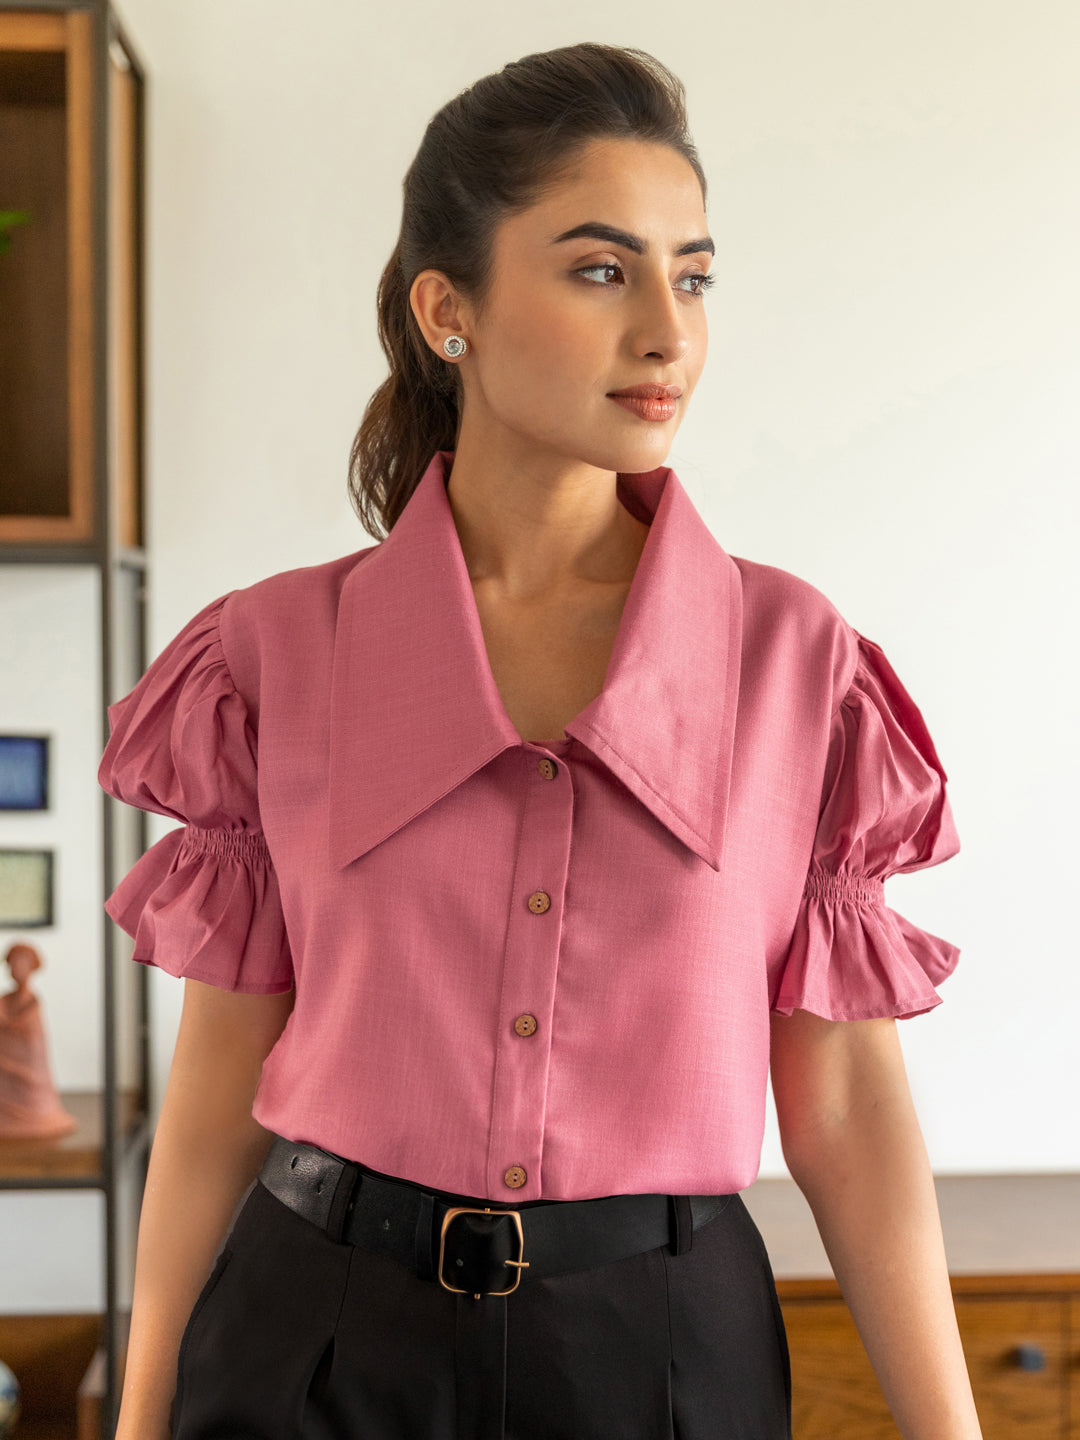 Rose Pink Shirt for Office Wear